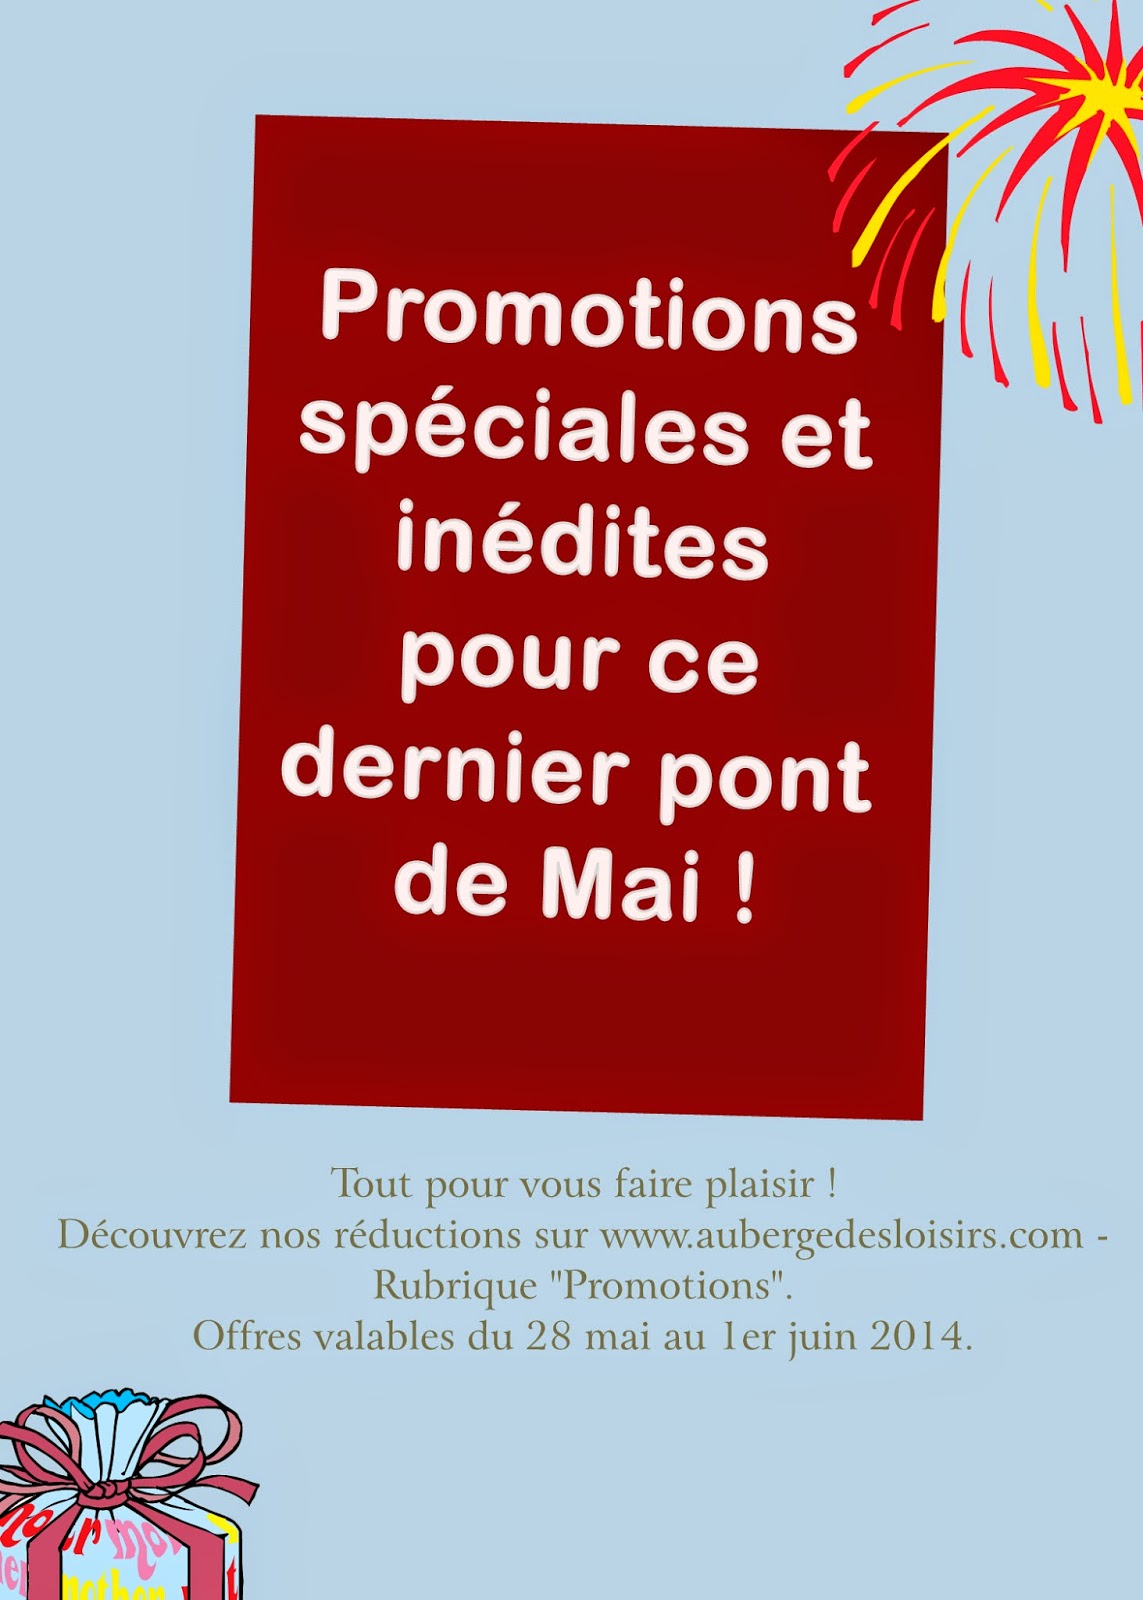 http://www.aubergedesloisirs.com/157-promotions